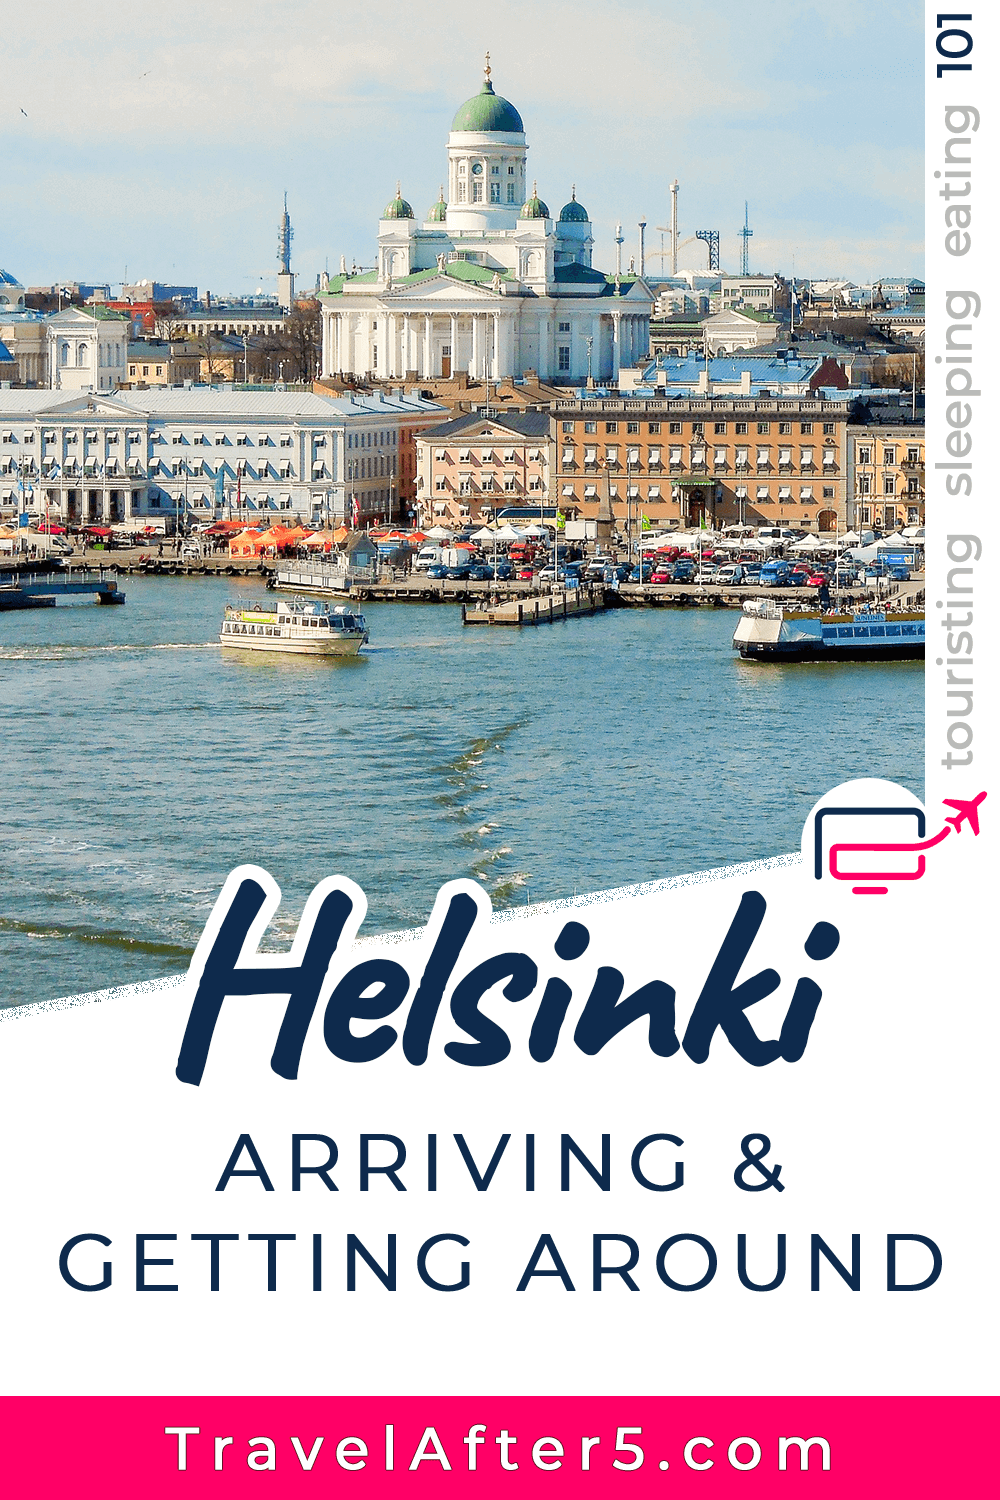 Pinterest Pin_Helsinki 101, Finland, by Travel After 5